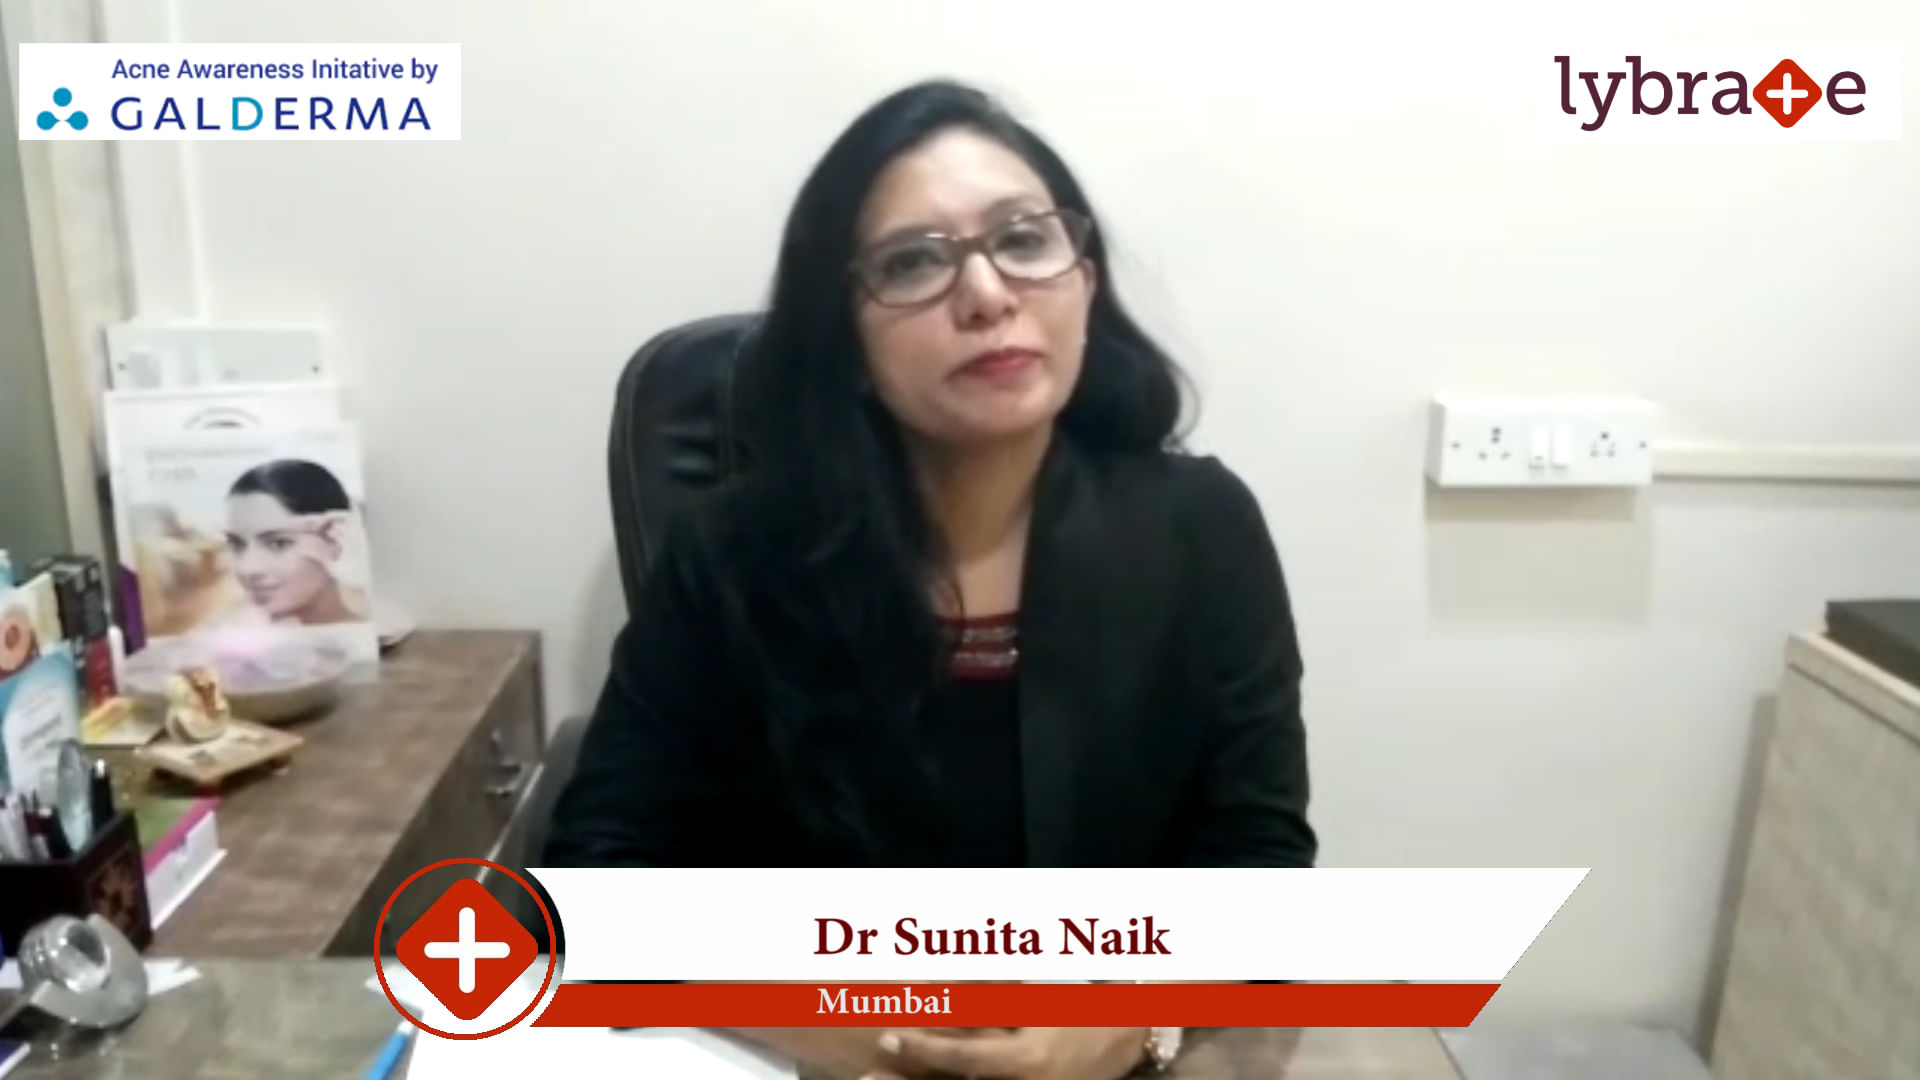 Lybrate | Dr. Sunita Naik speaks on IMPORTANCE OF TREATING ACNE EARLY